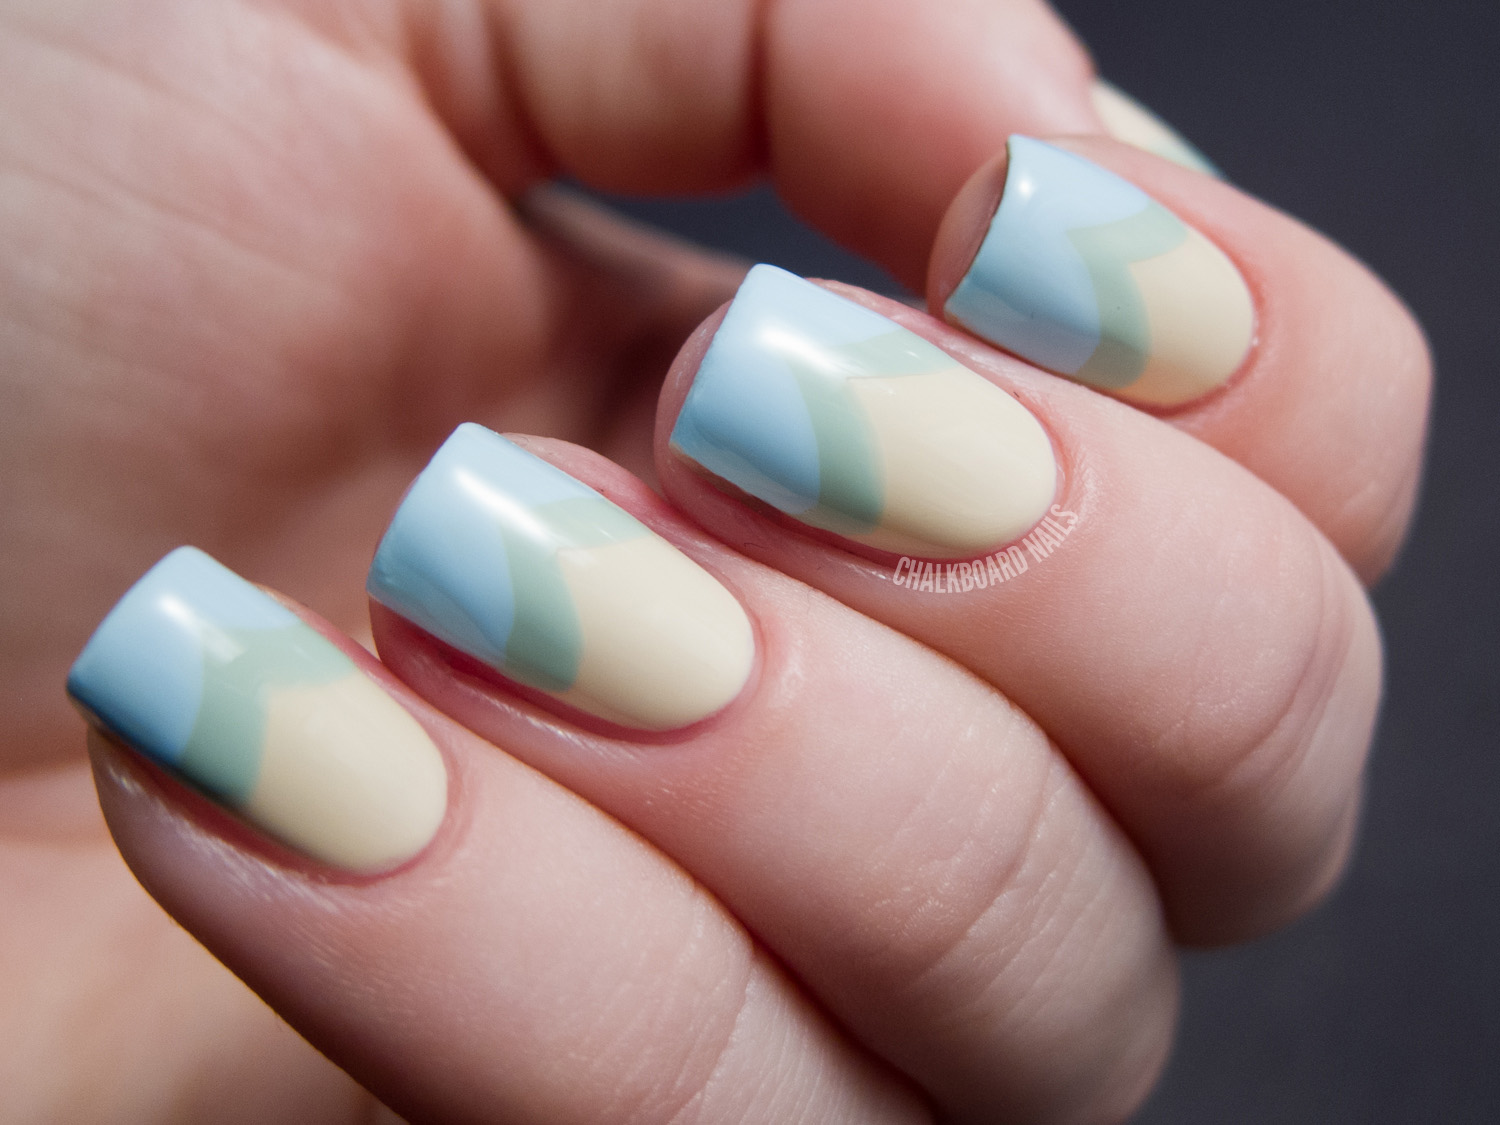 4. The Art of Lovely Nails: A Blog for Inspiration - wide 1